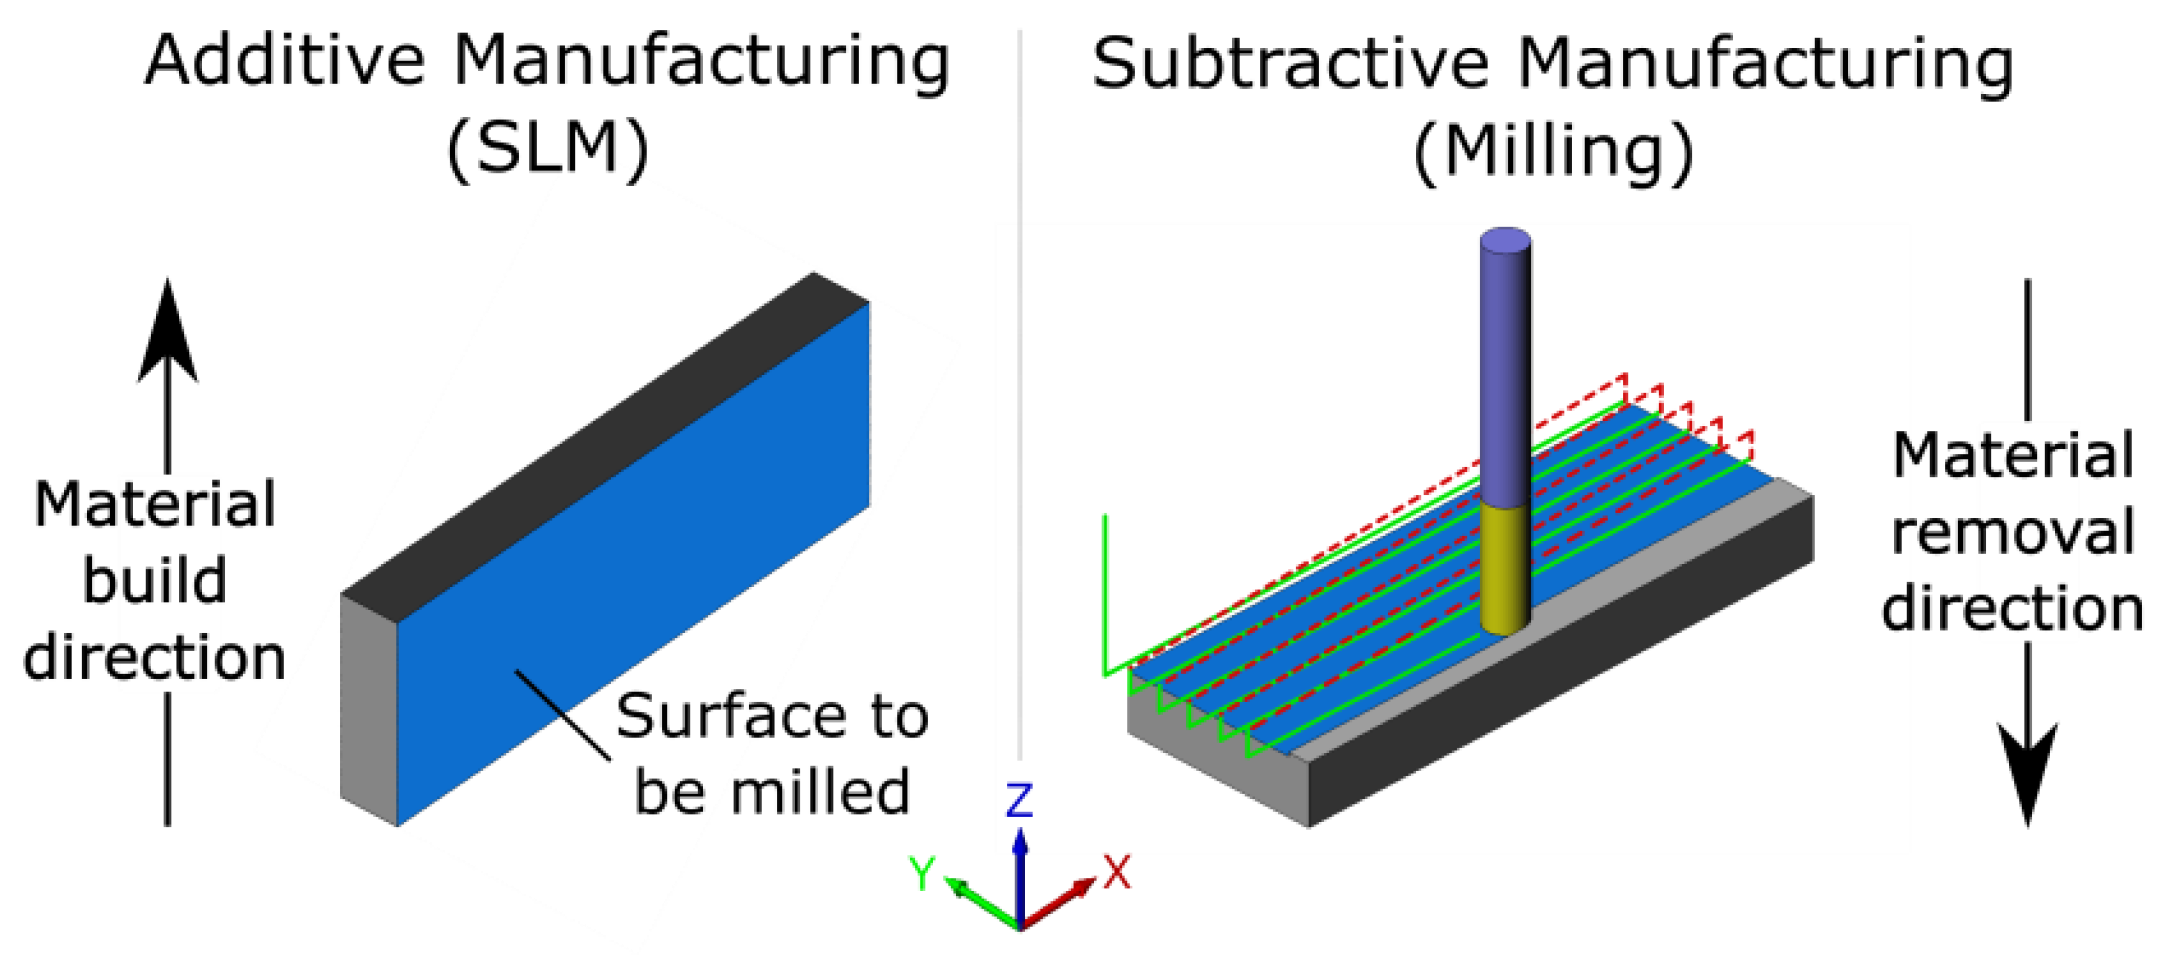 Analysis of variance for surface roughness Ra (microns)